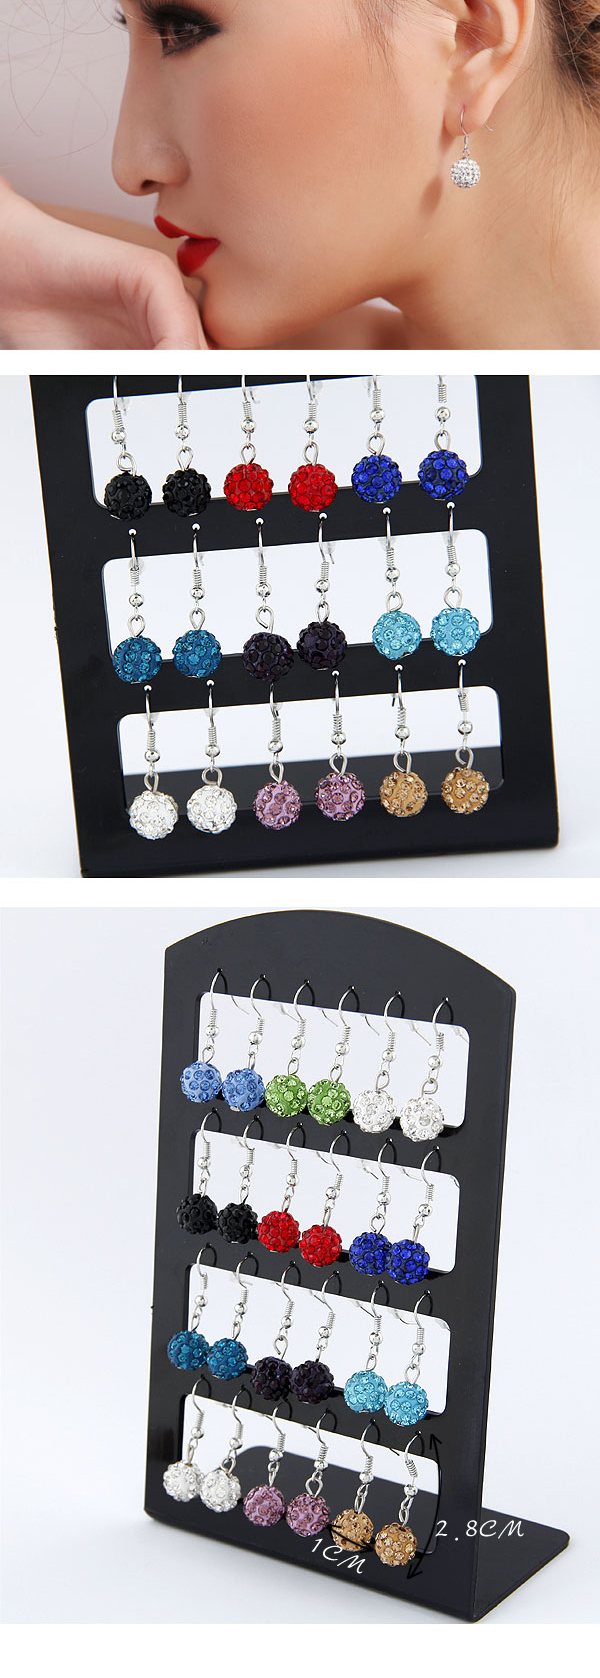 Extreme Picture Color Sweety Ball Design Alloy Fashion earrings,Earrings set